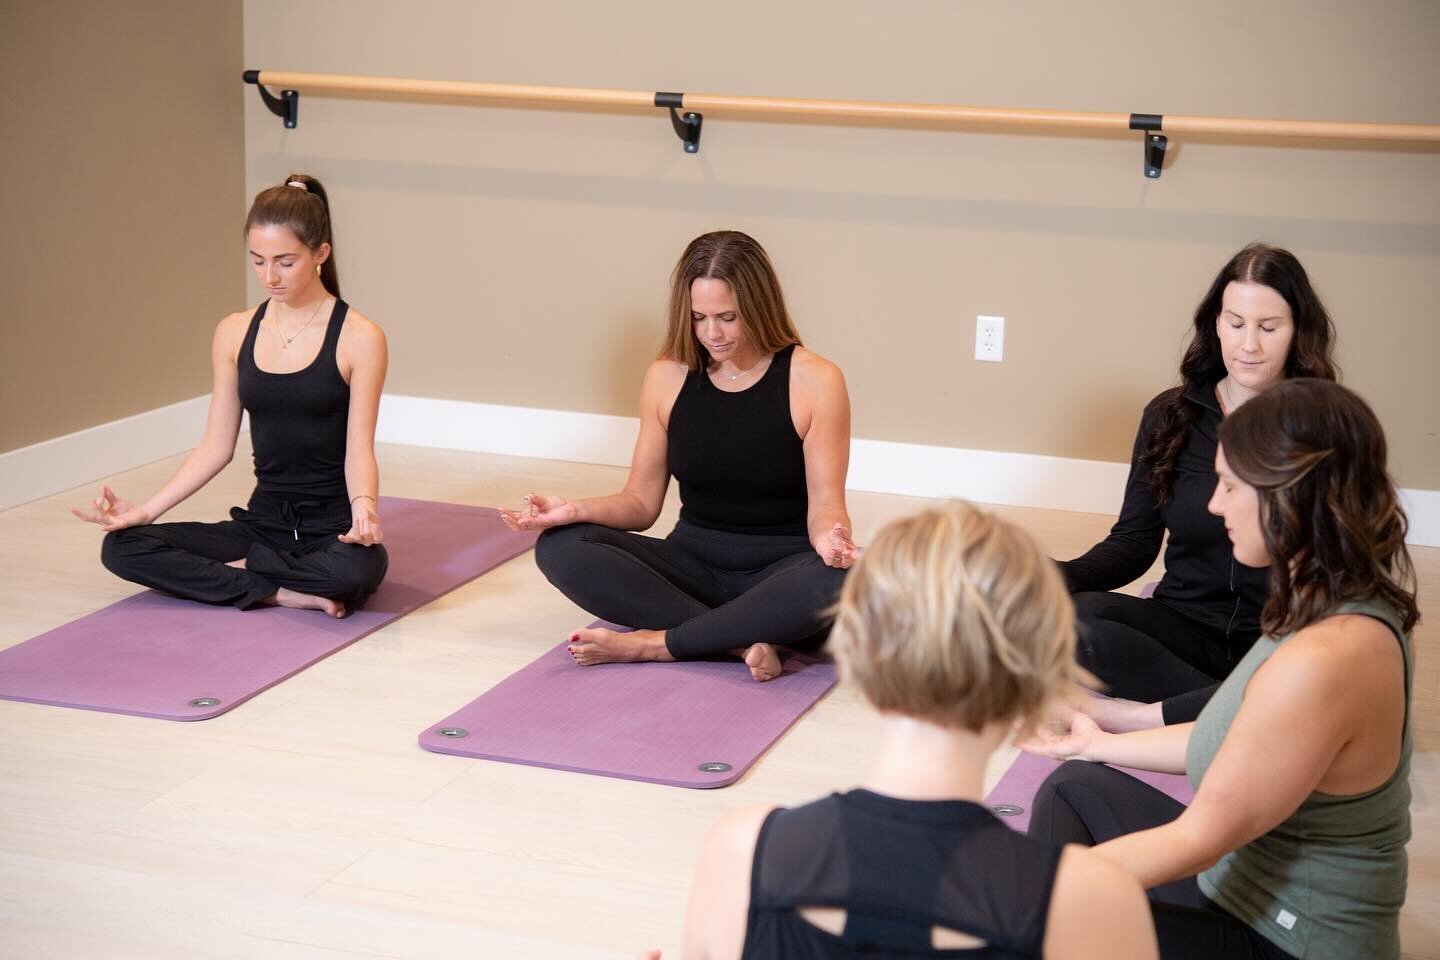 Finding the perfect workout for YOU can be tough, but we&rsquo;ve got something special!

Our #yoga, #pilates, and #bootybarre classes are designed to cater to all #fitness levels and preferences. 

Whether you&rsquo;re looking for a low-impact routi